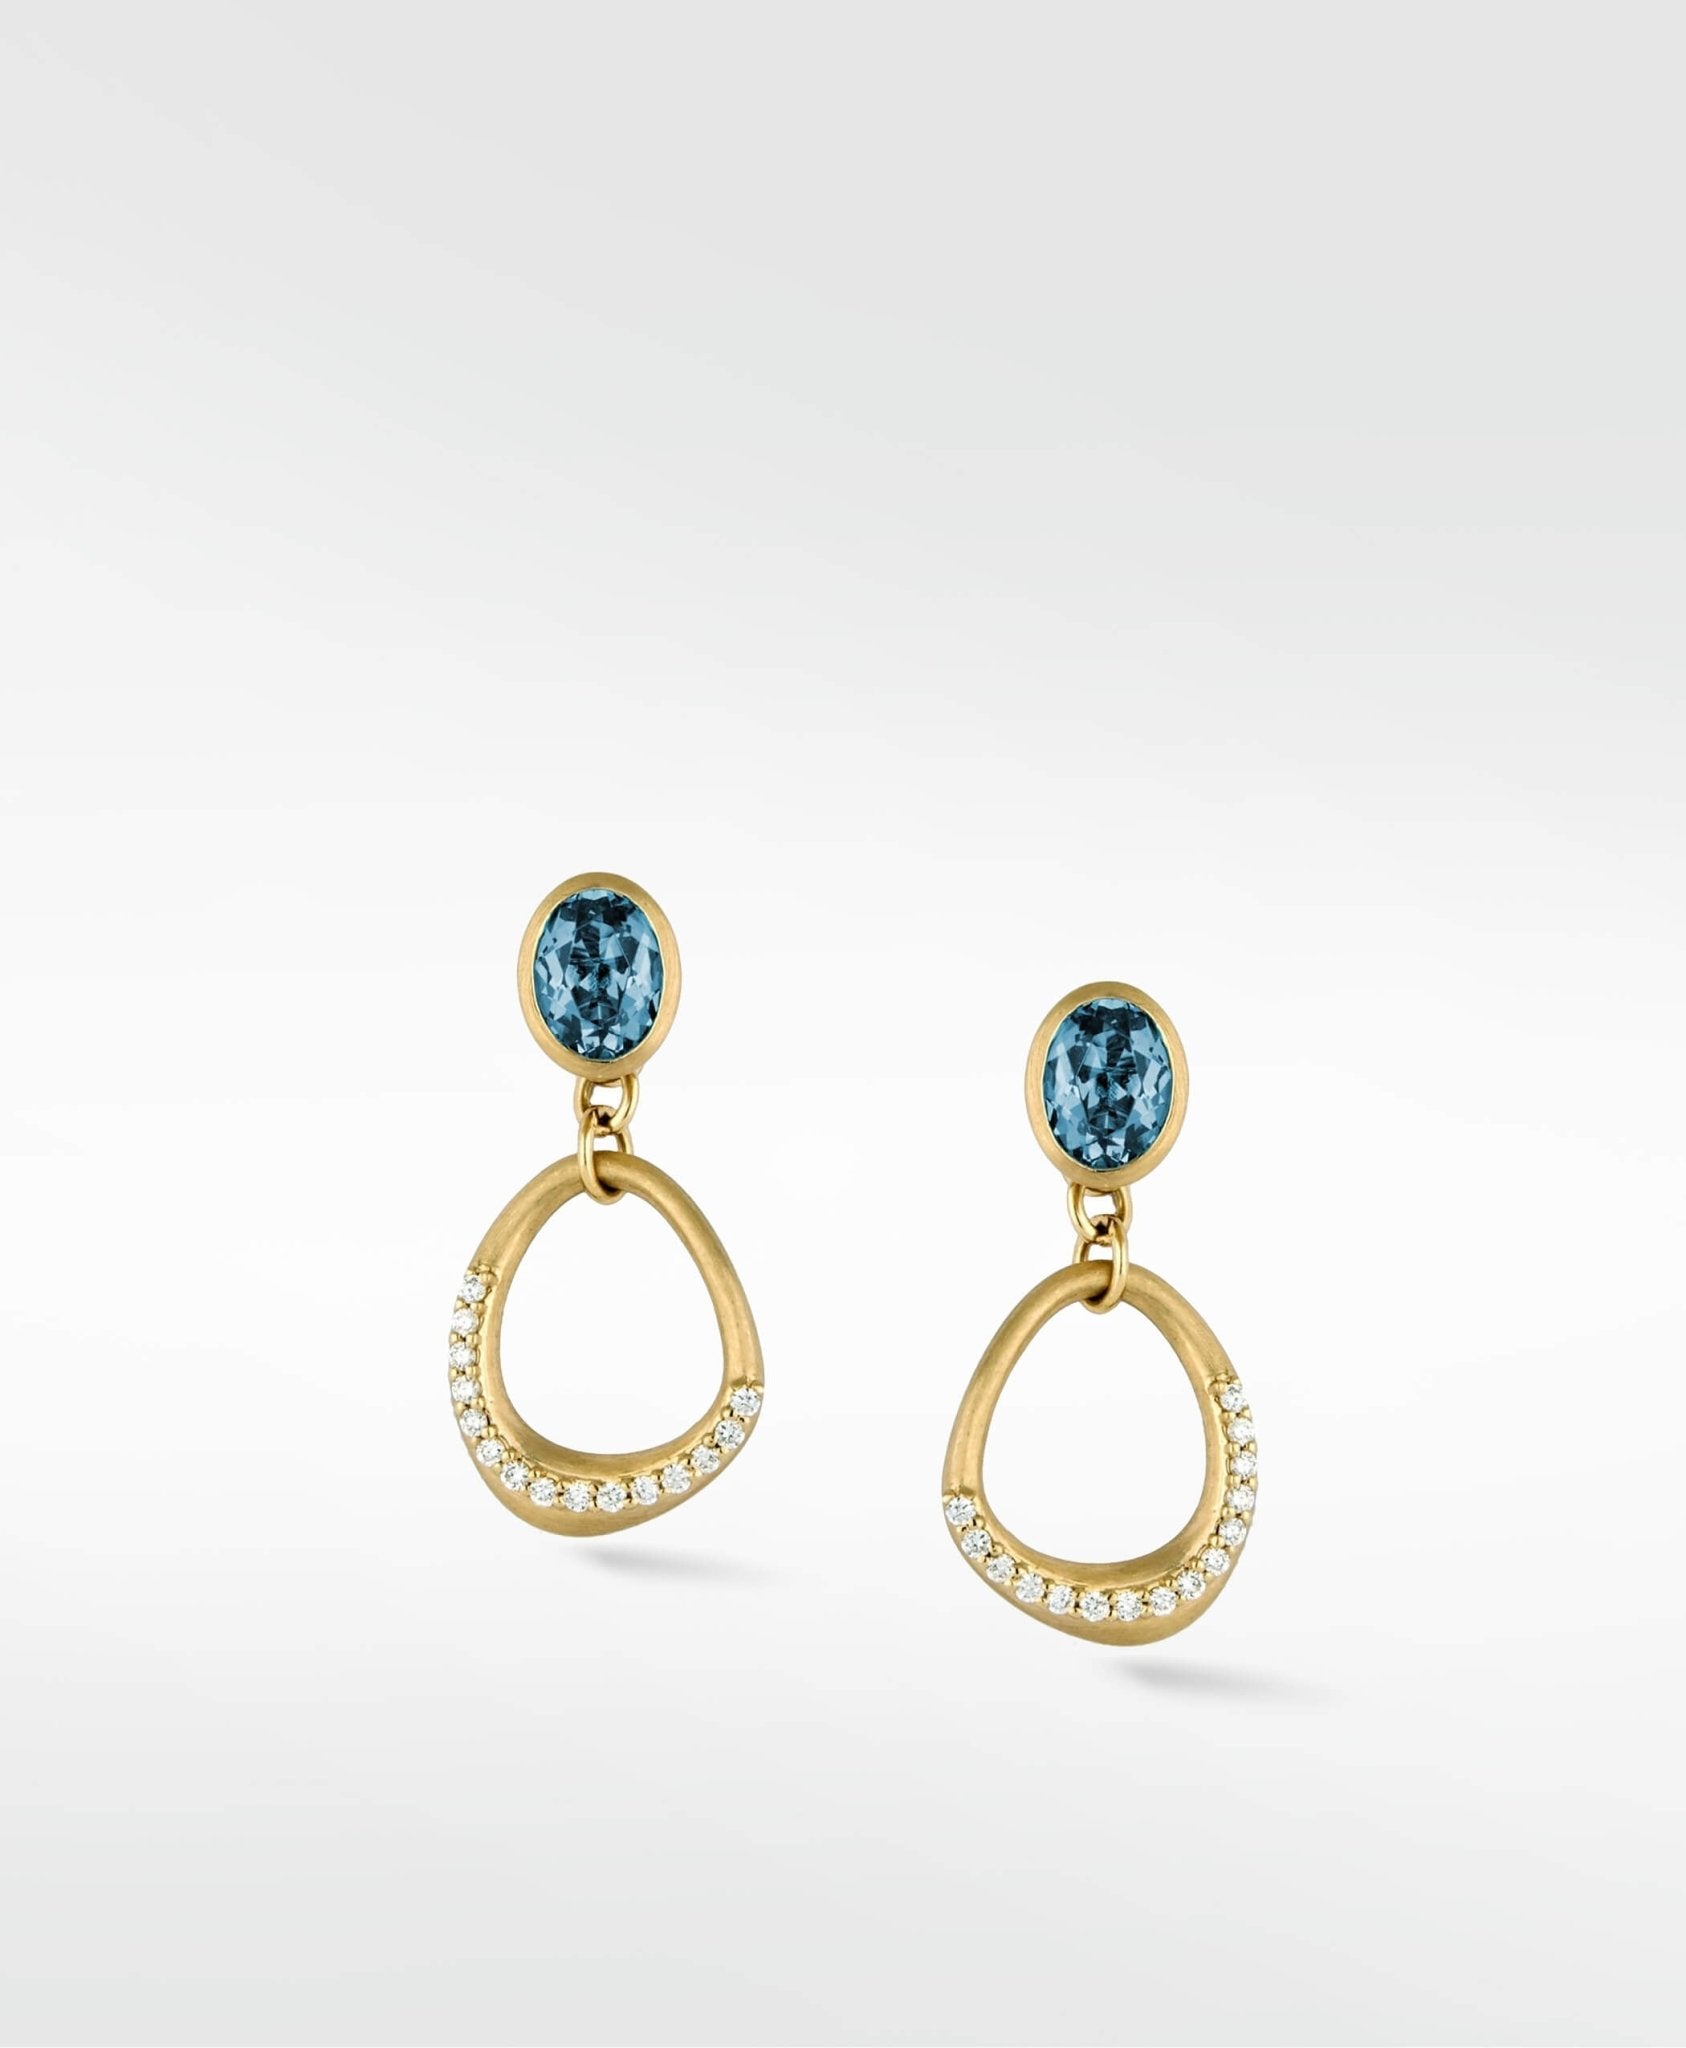 Dune Blue Drop Earrings in Solid 14K Yellow Gold - Lark and Berry